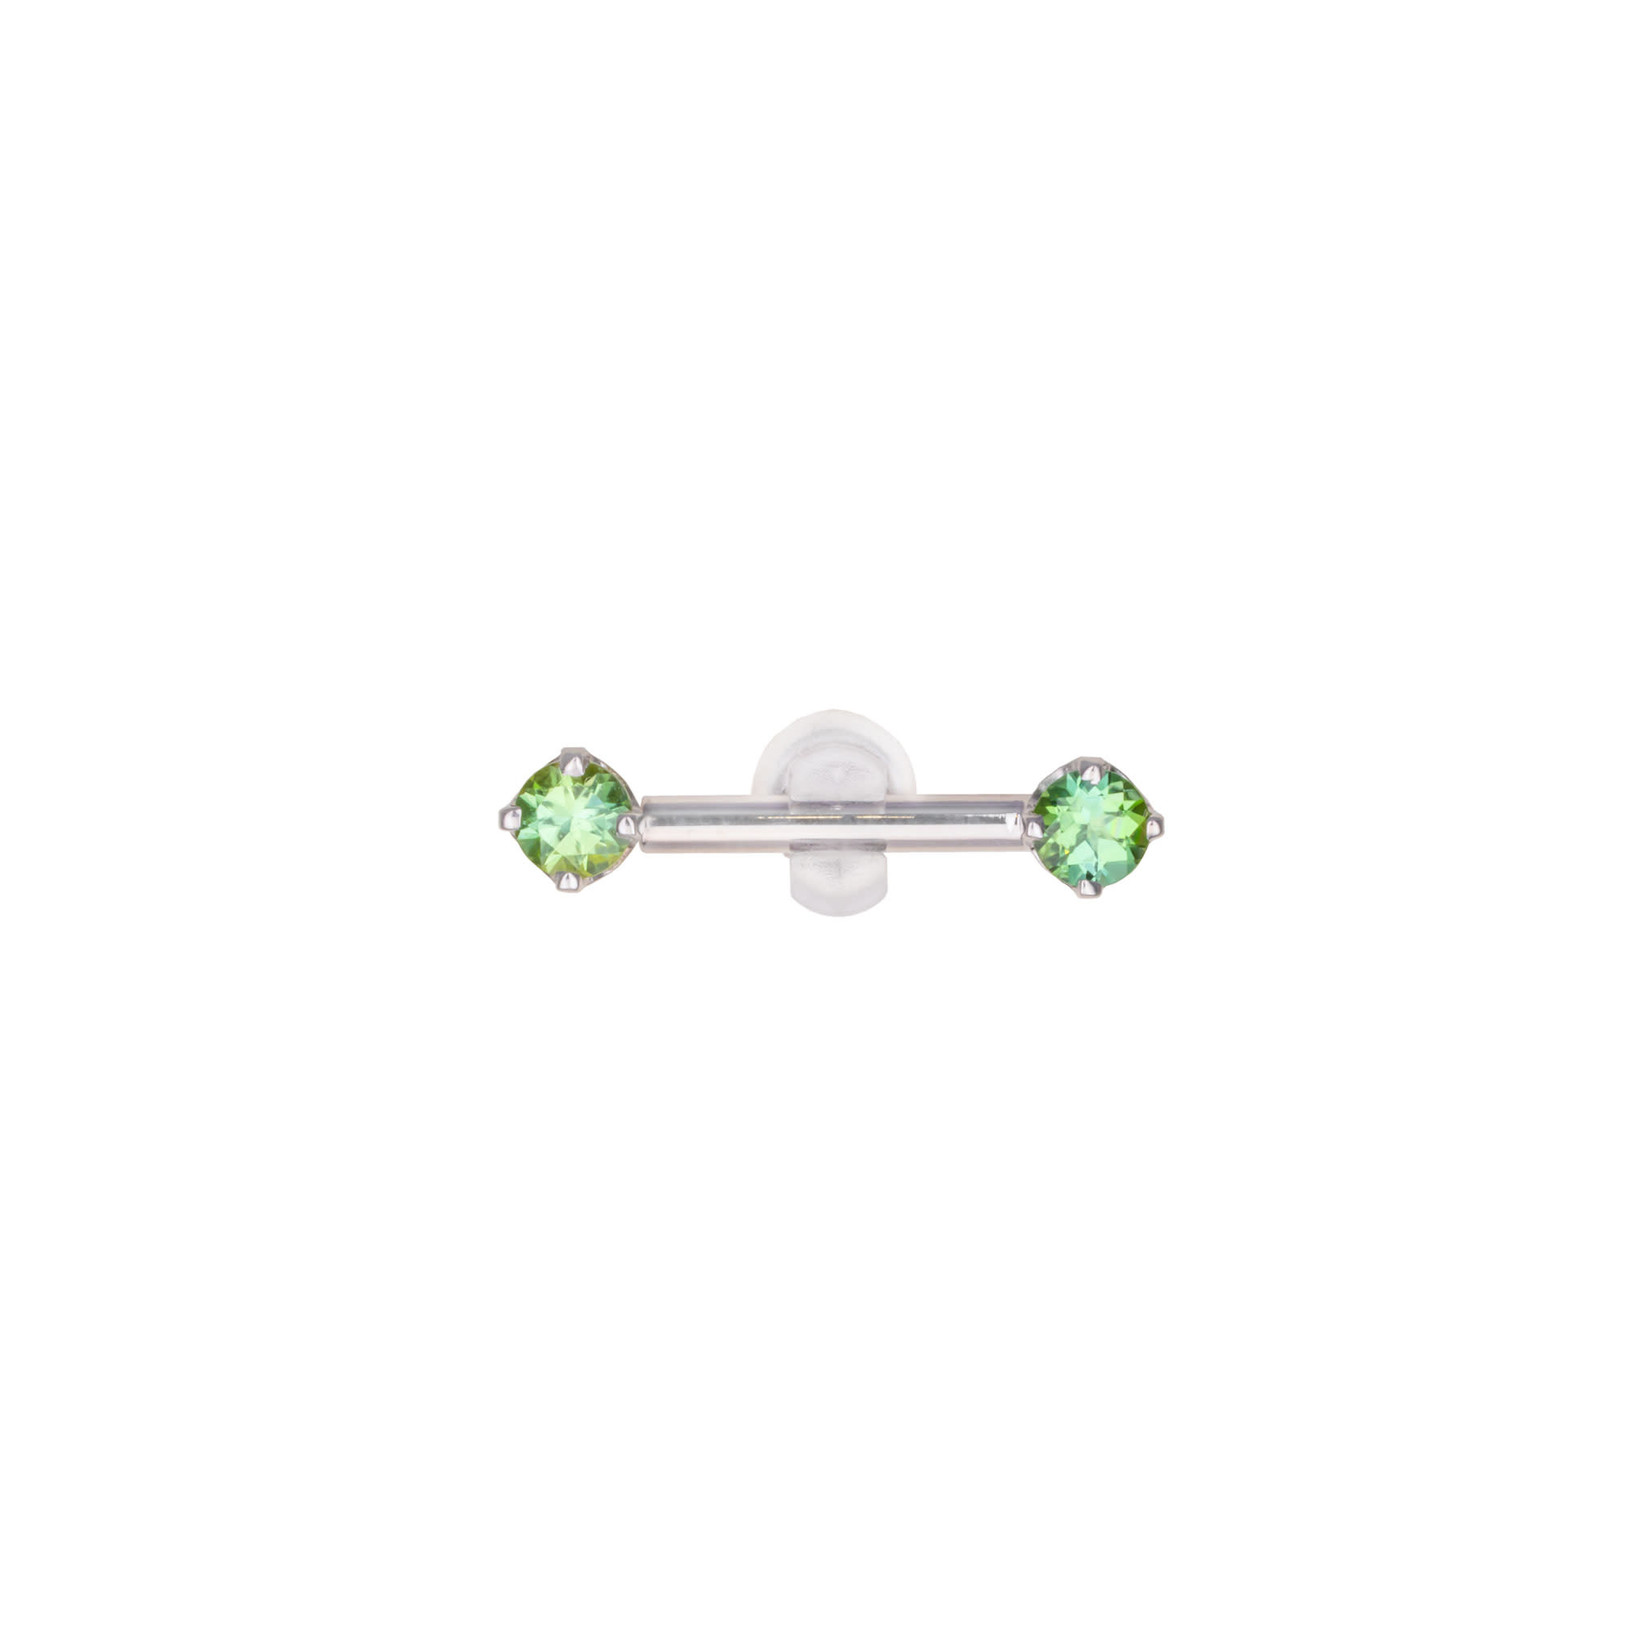 BVLA BVLA 12g 1/2 white gold "Prong Bell" with 4.0 seafoam tourmaline. Sold as a pair